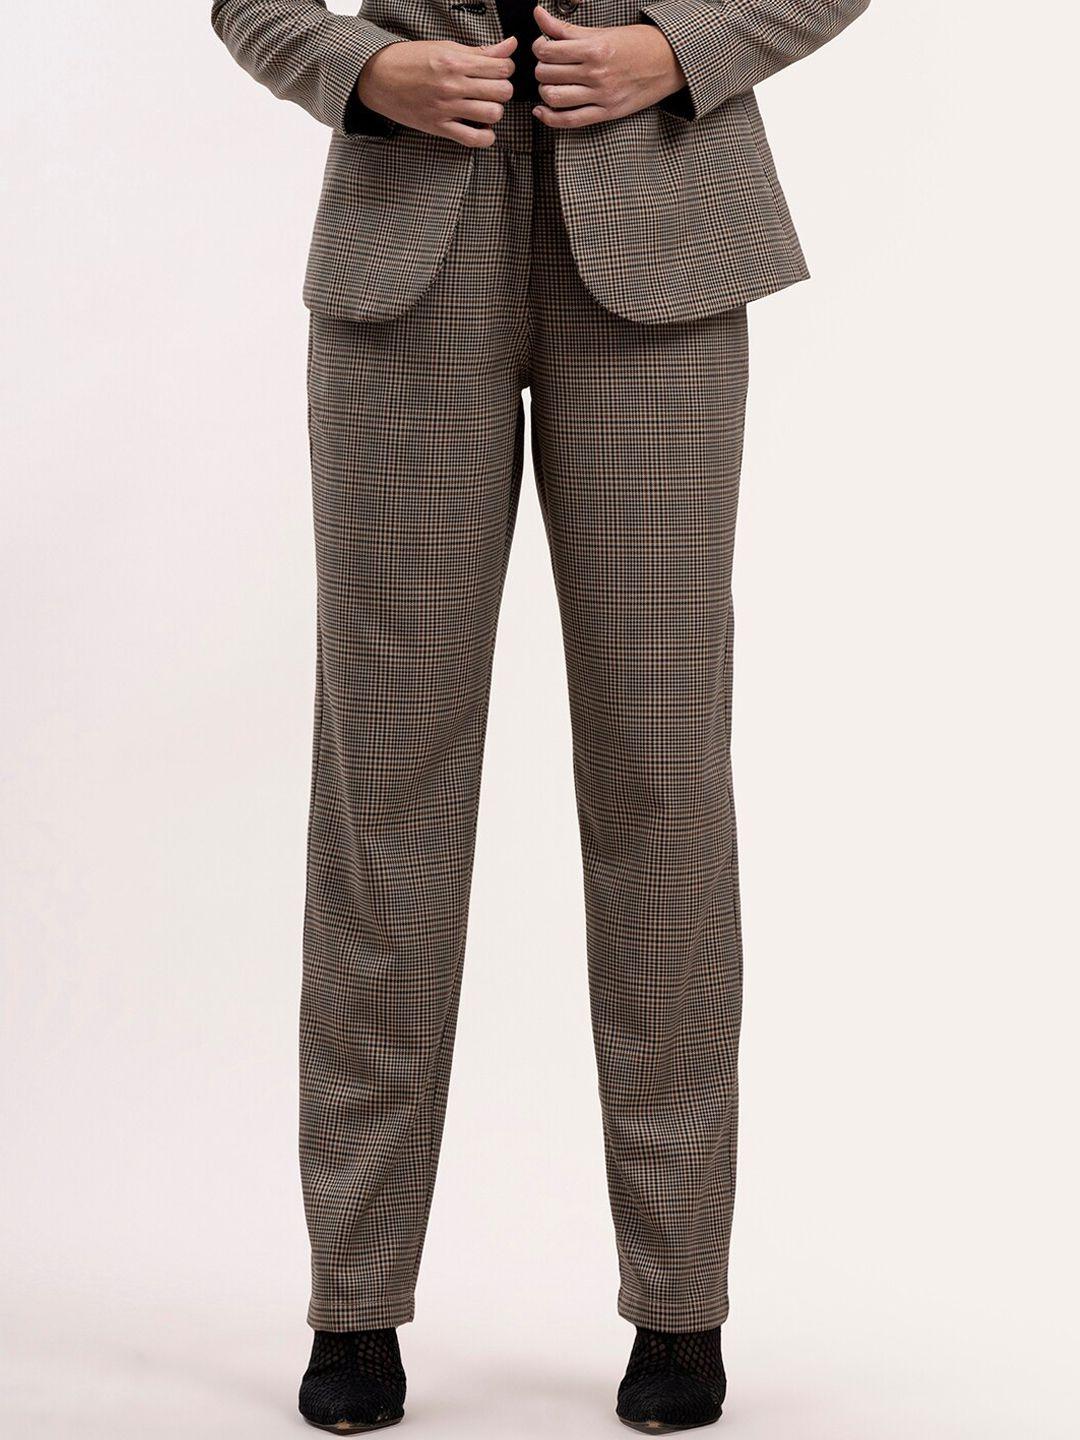 fablestreet-women-brown-&-black-checked-cotton-formal-trousers